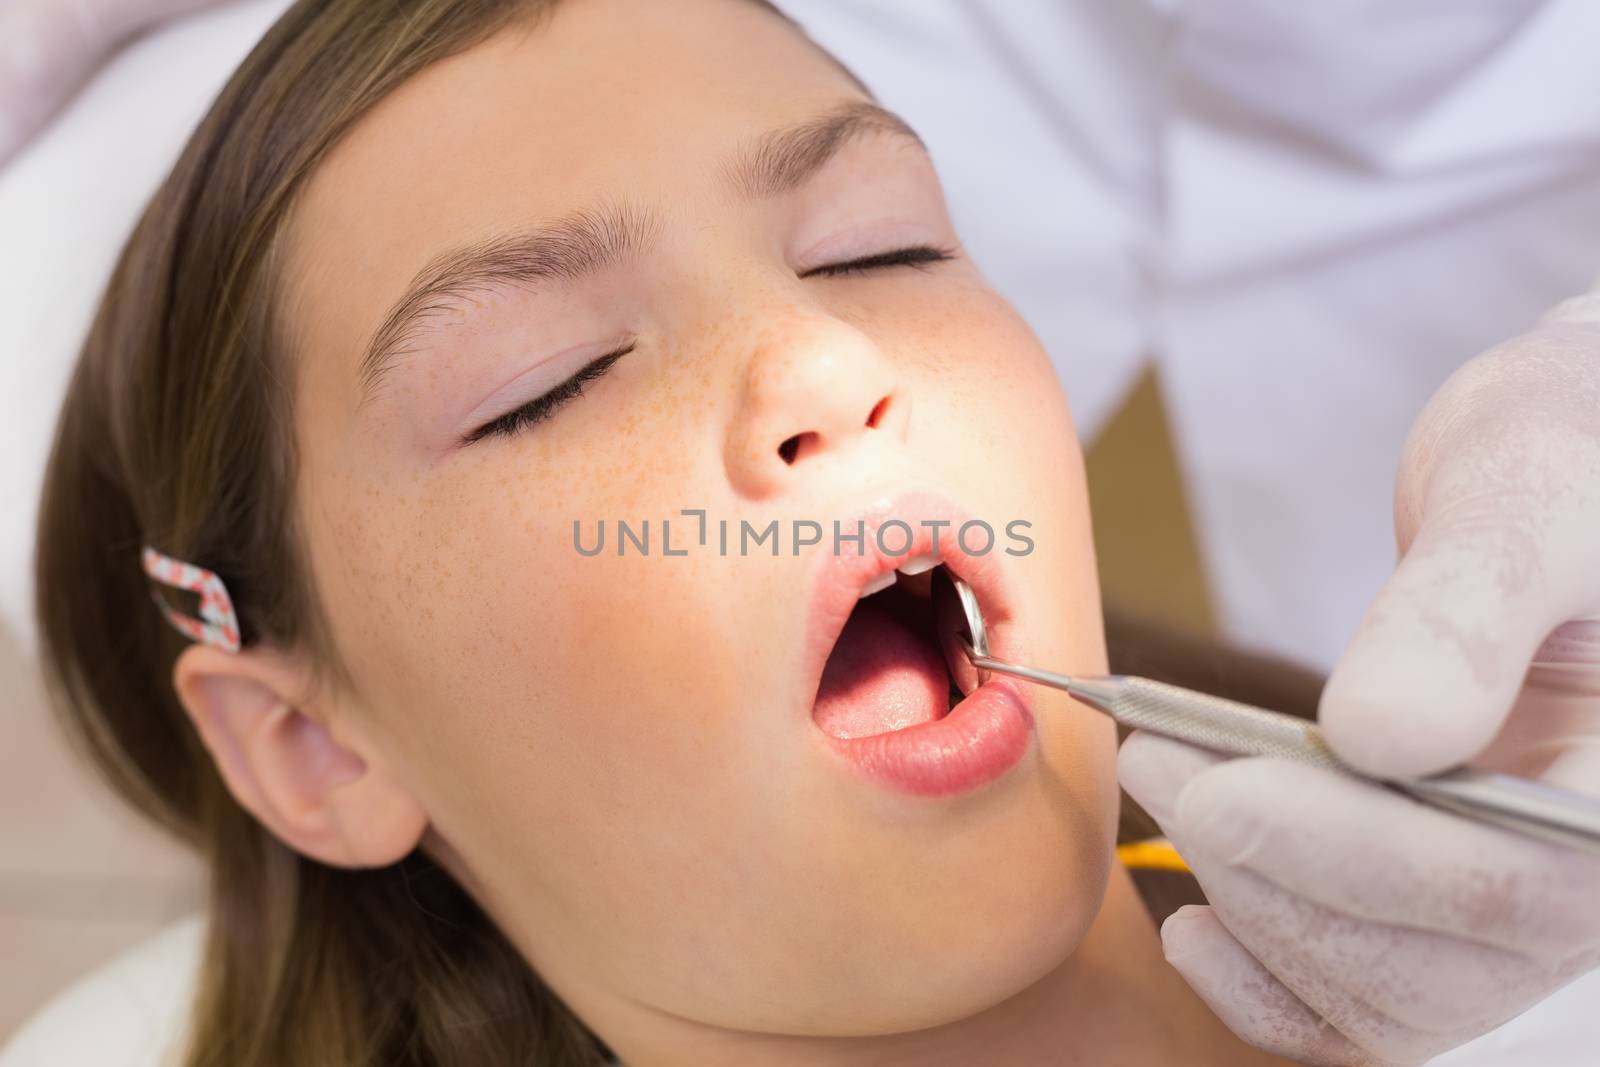 Pediatric dentist examining a patients teeth in the dentists chair by Wavebreakmedia